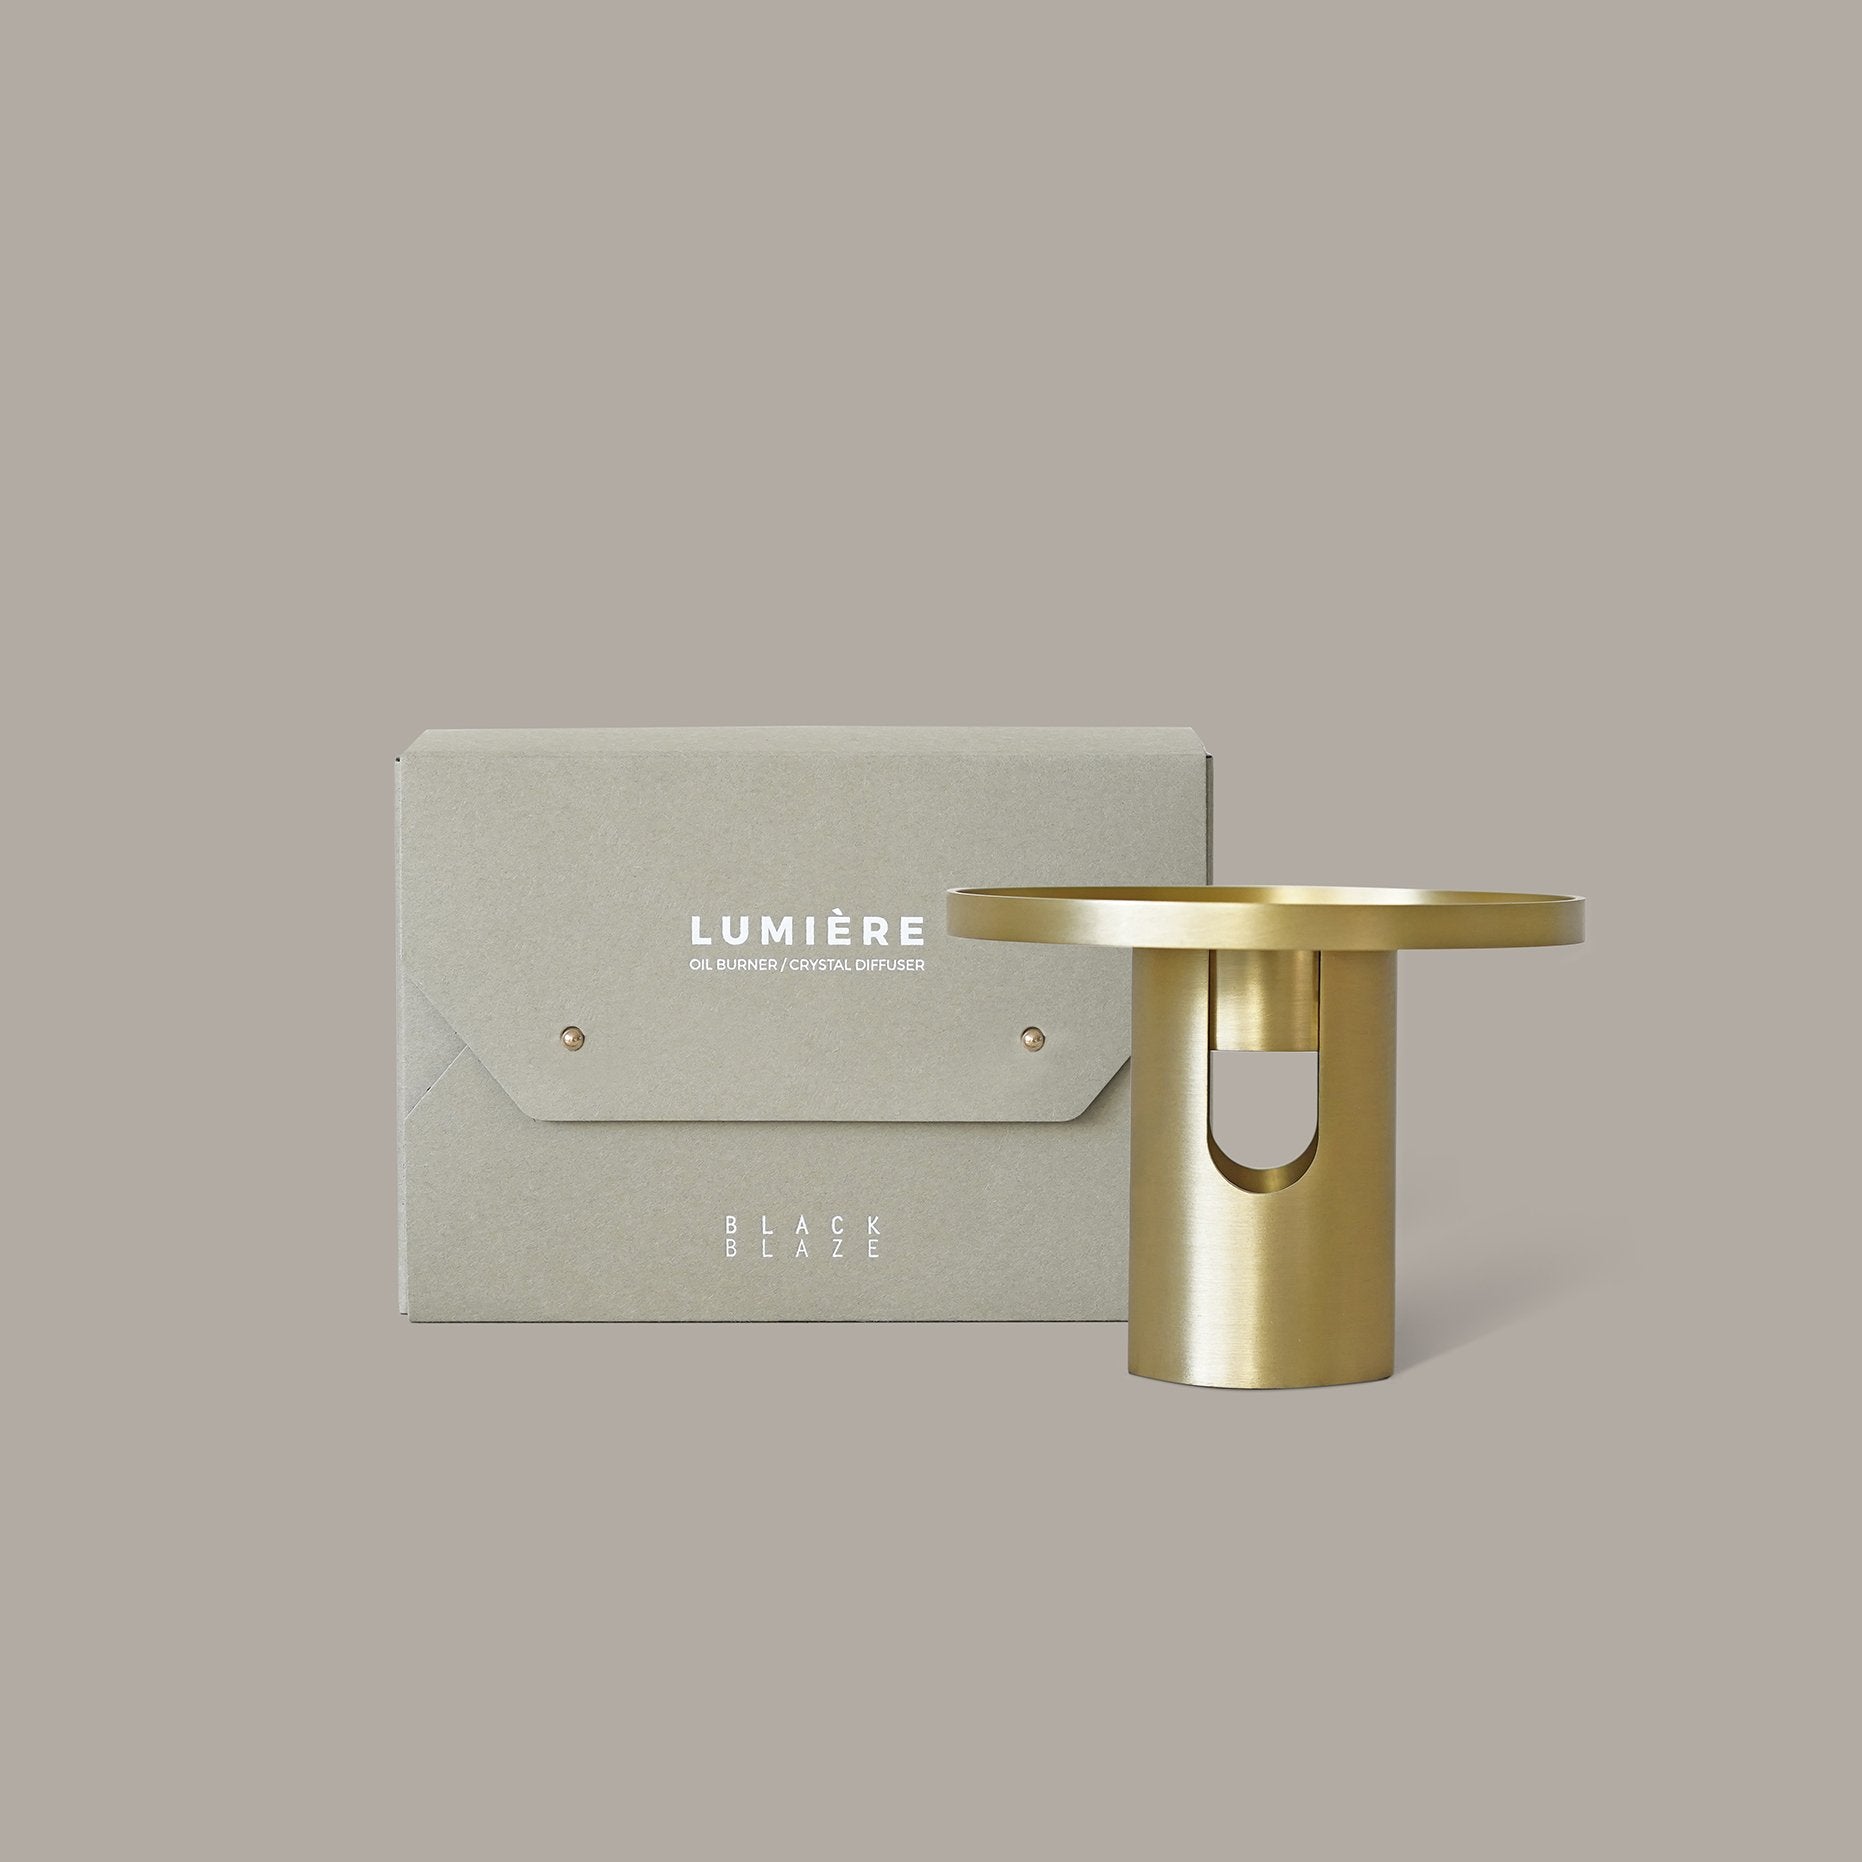 Lights the way for an exploration of scents.Lumiére is minimal in design, letting the smooth lines of a torch stand tall. Acting as a beacon for scent. A platform for exploration. USE AS